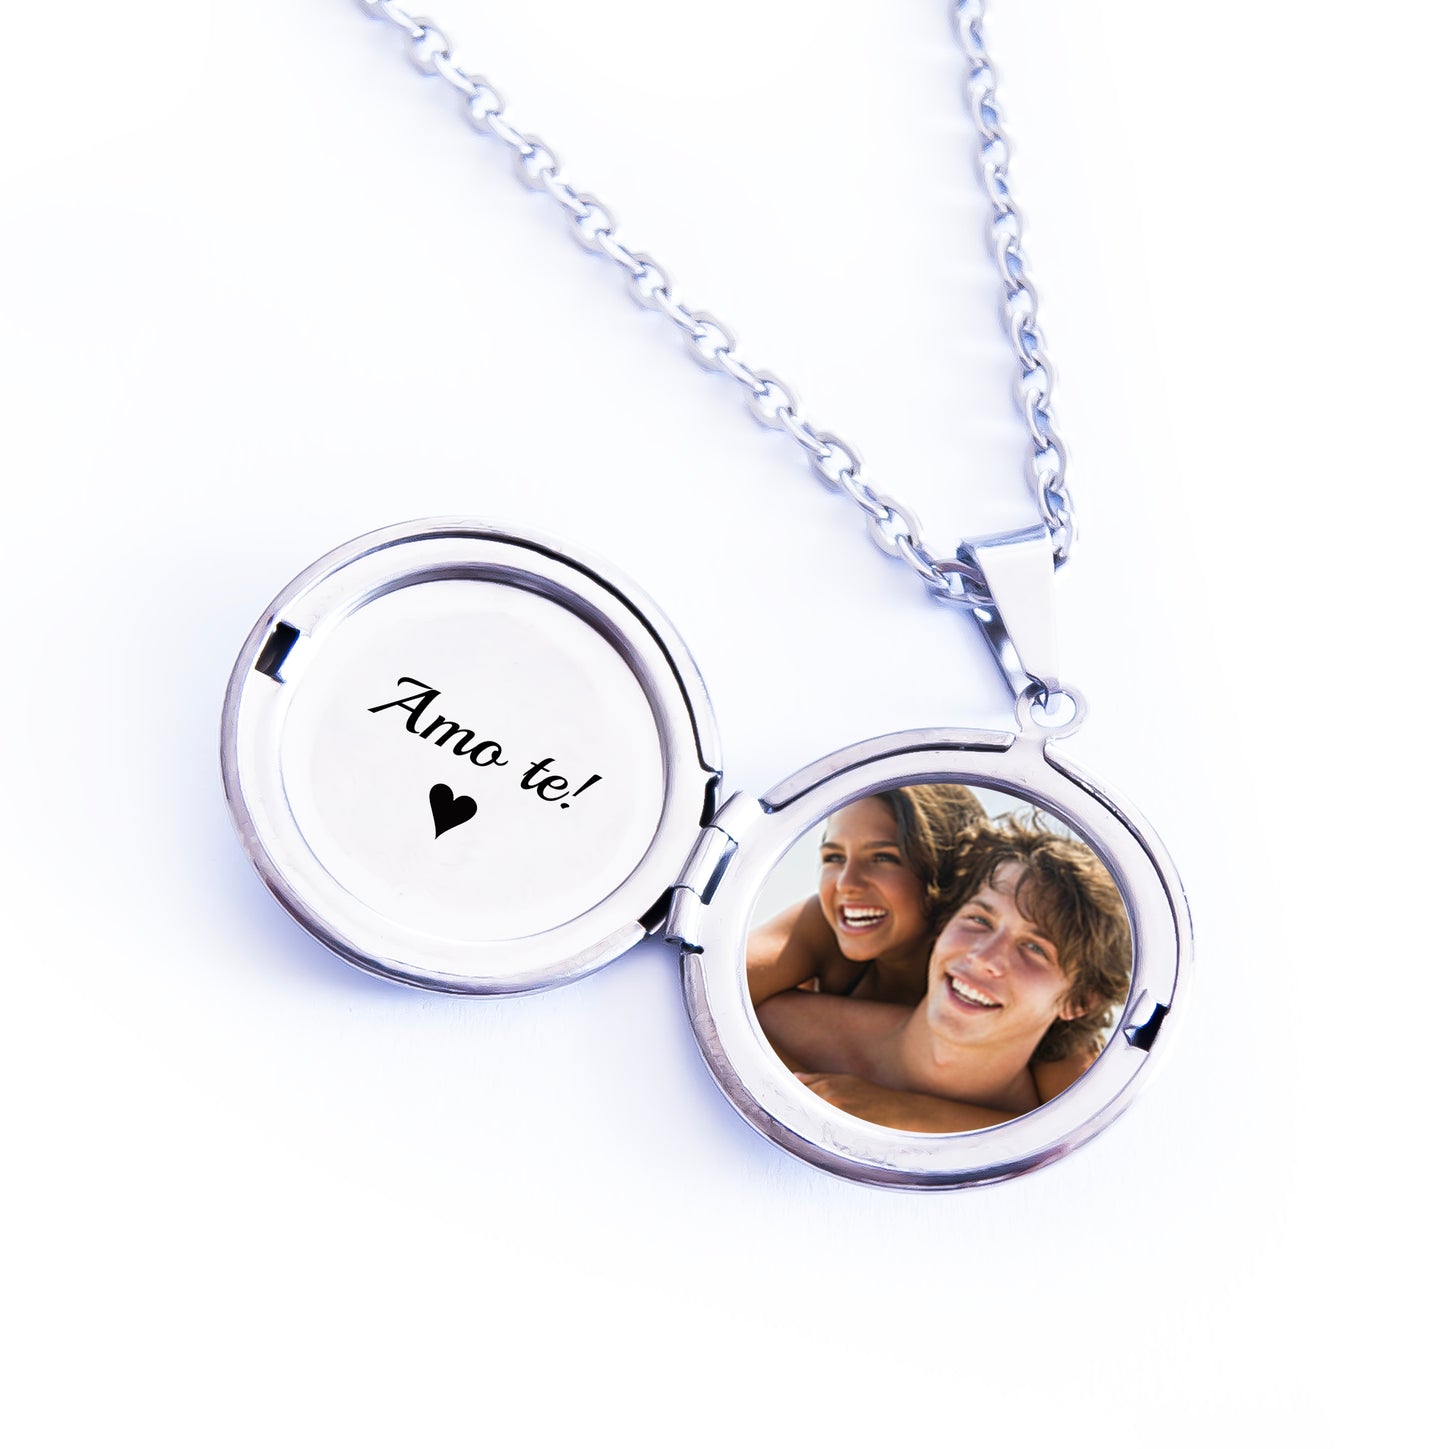 Personalized Locket Necklace with Photo - Unique Gift for Wife, New Mom Gift